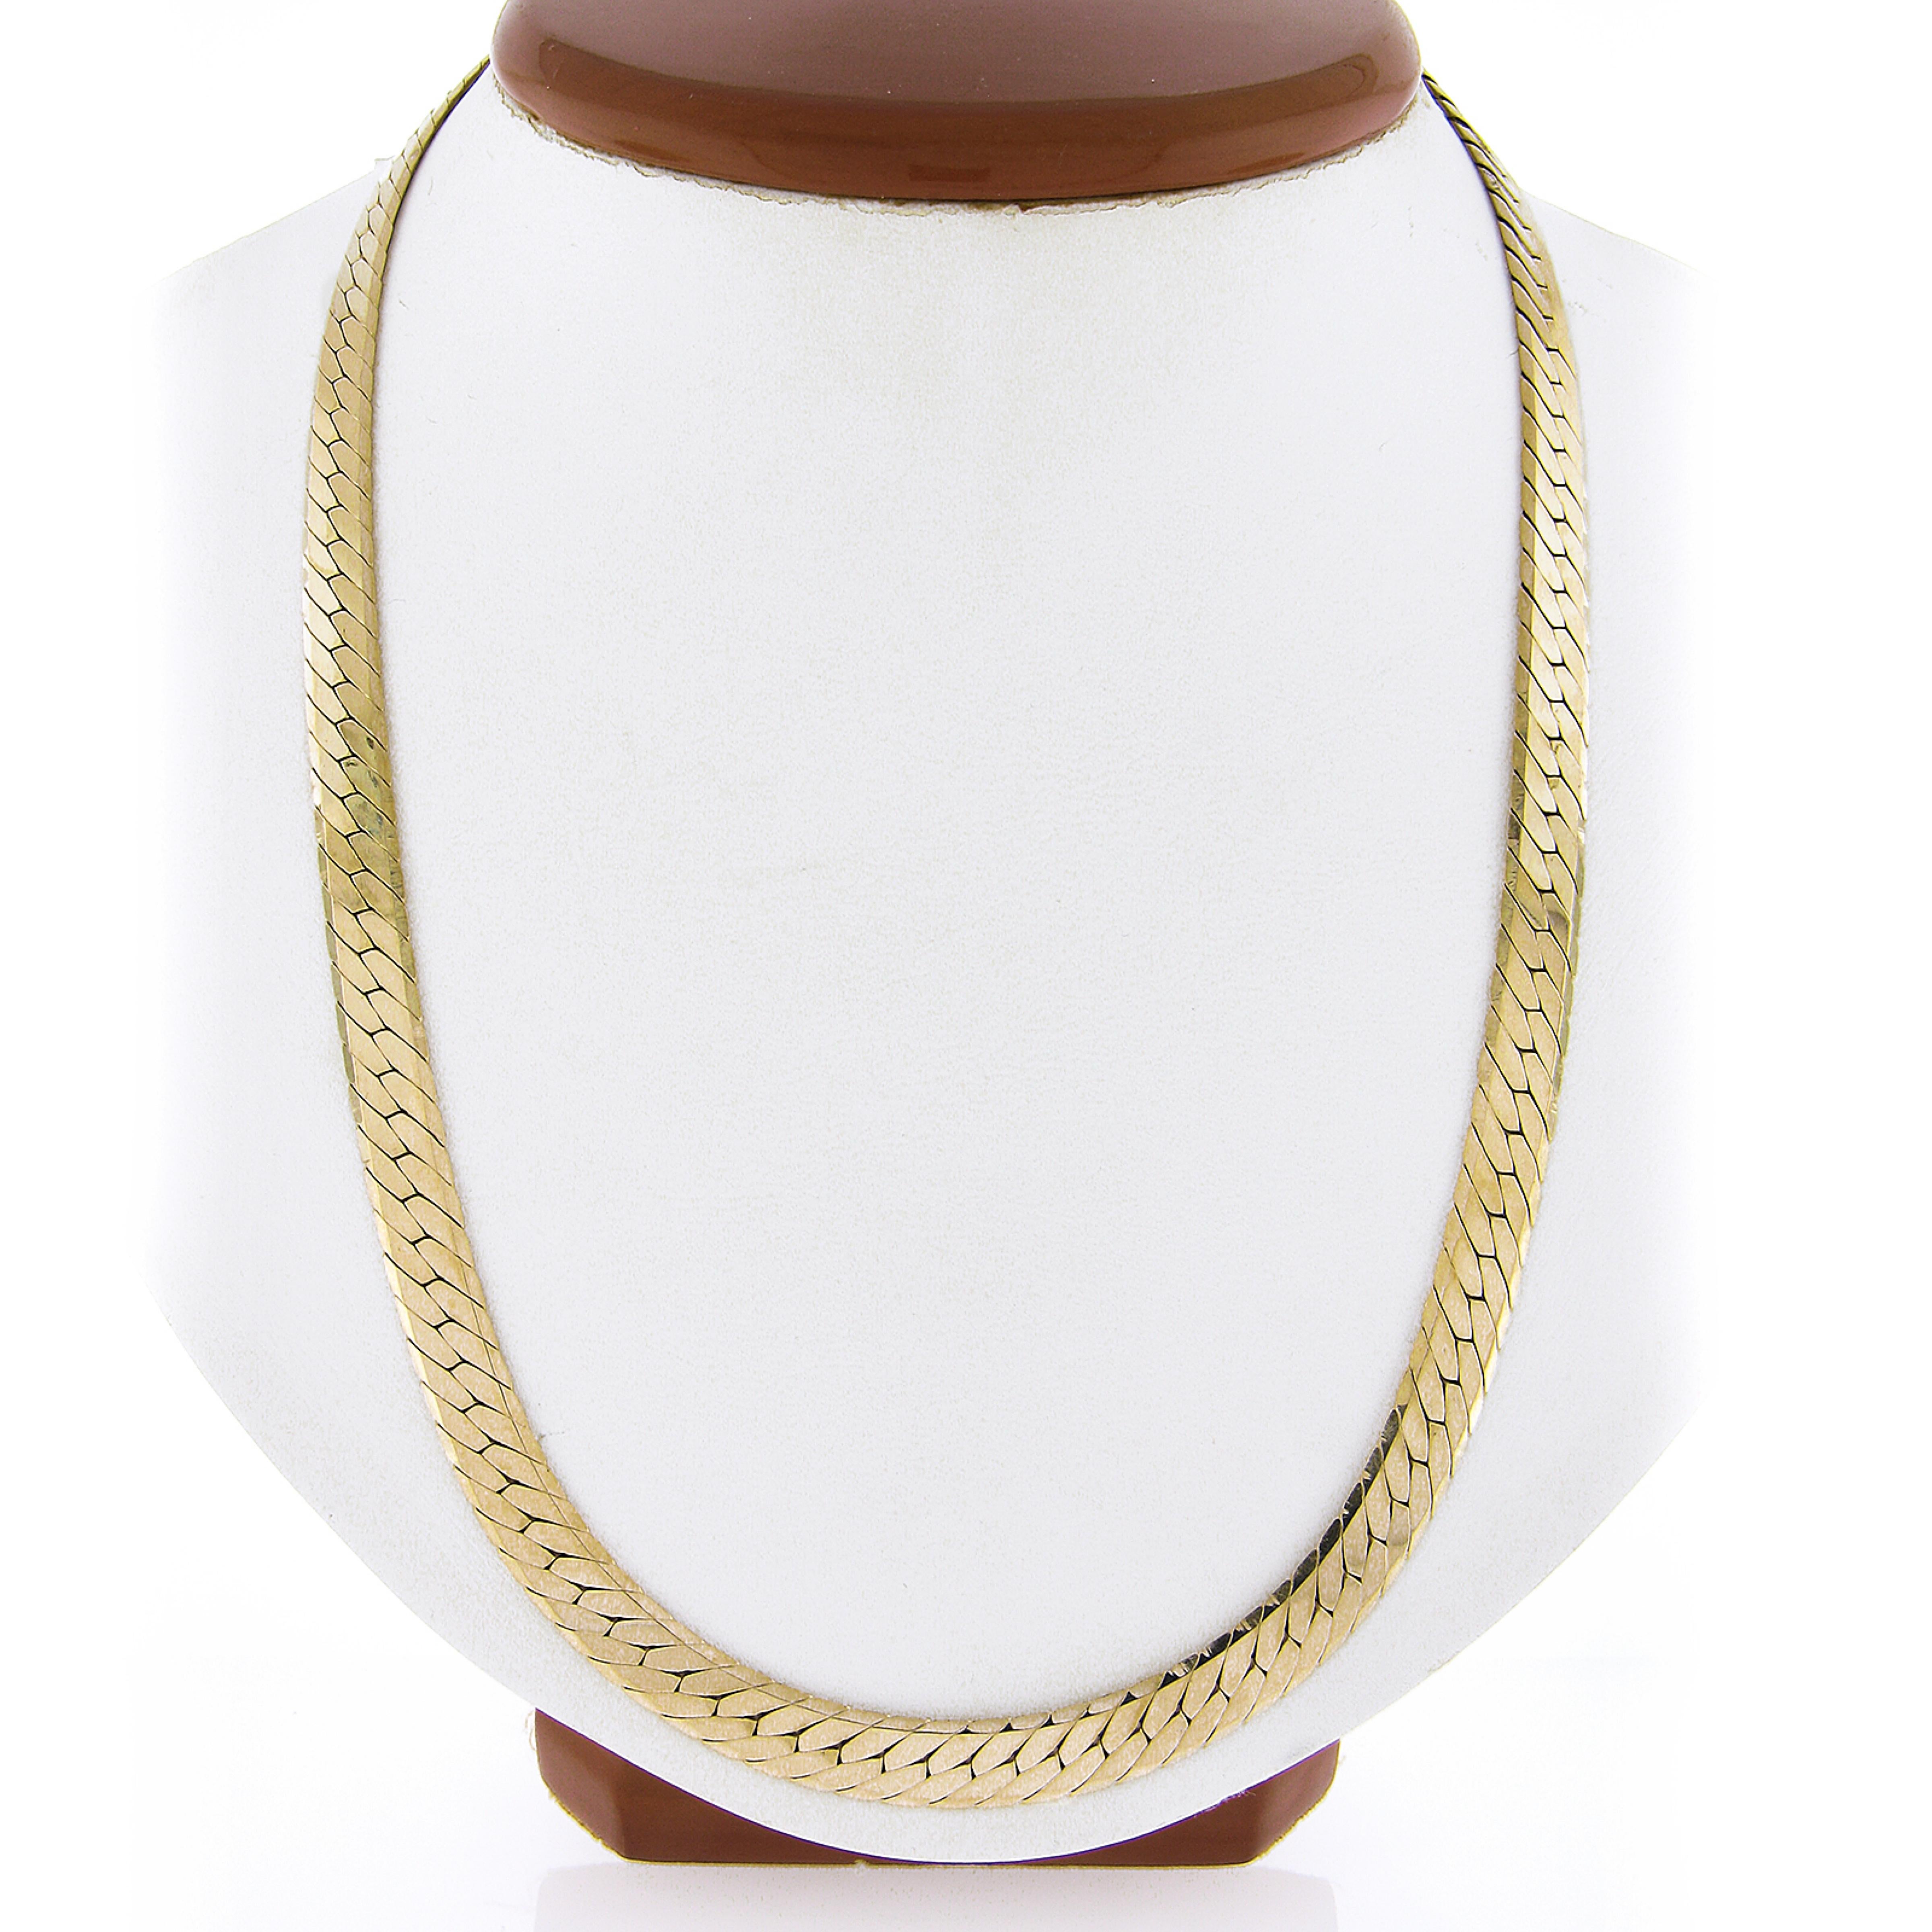 This gorgeous and very well made chain necklace was crafted in Italy from solid 14k yellow gold and features a fancy, flat, herringbone snake link with a super high-polished finish throughout that gives this piece a very attractive and super shiny